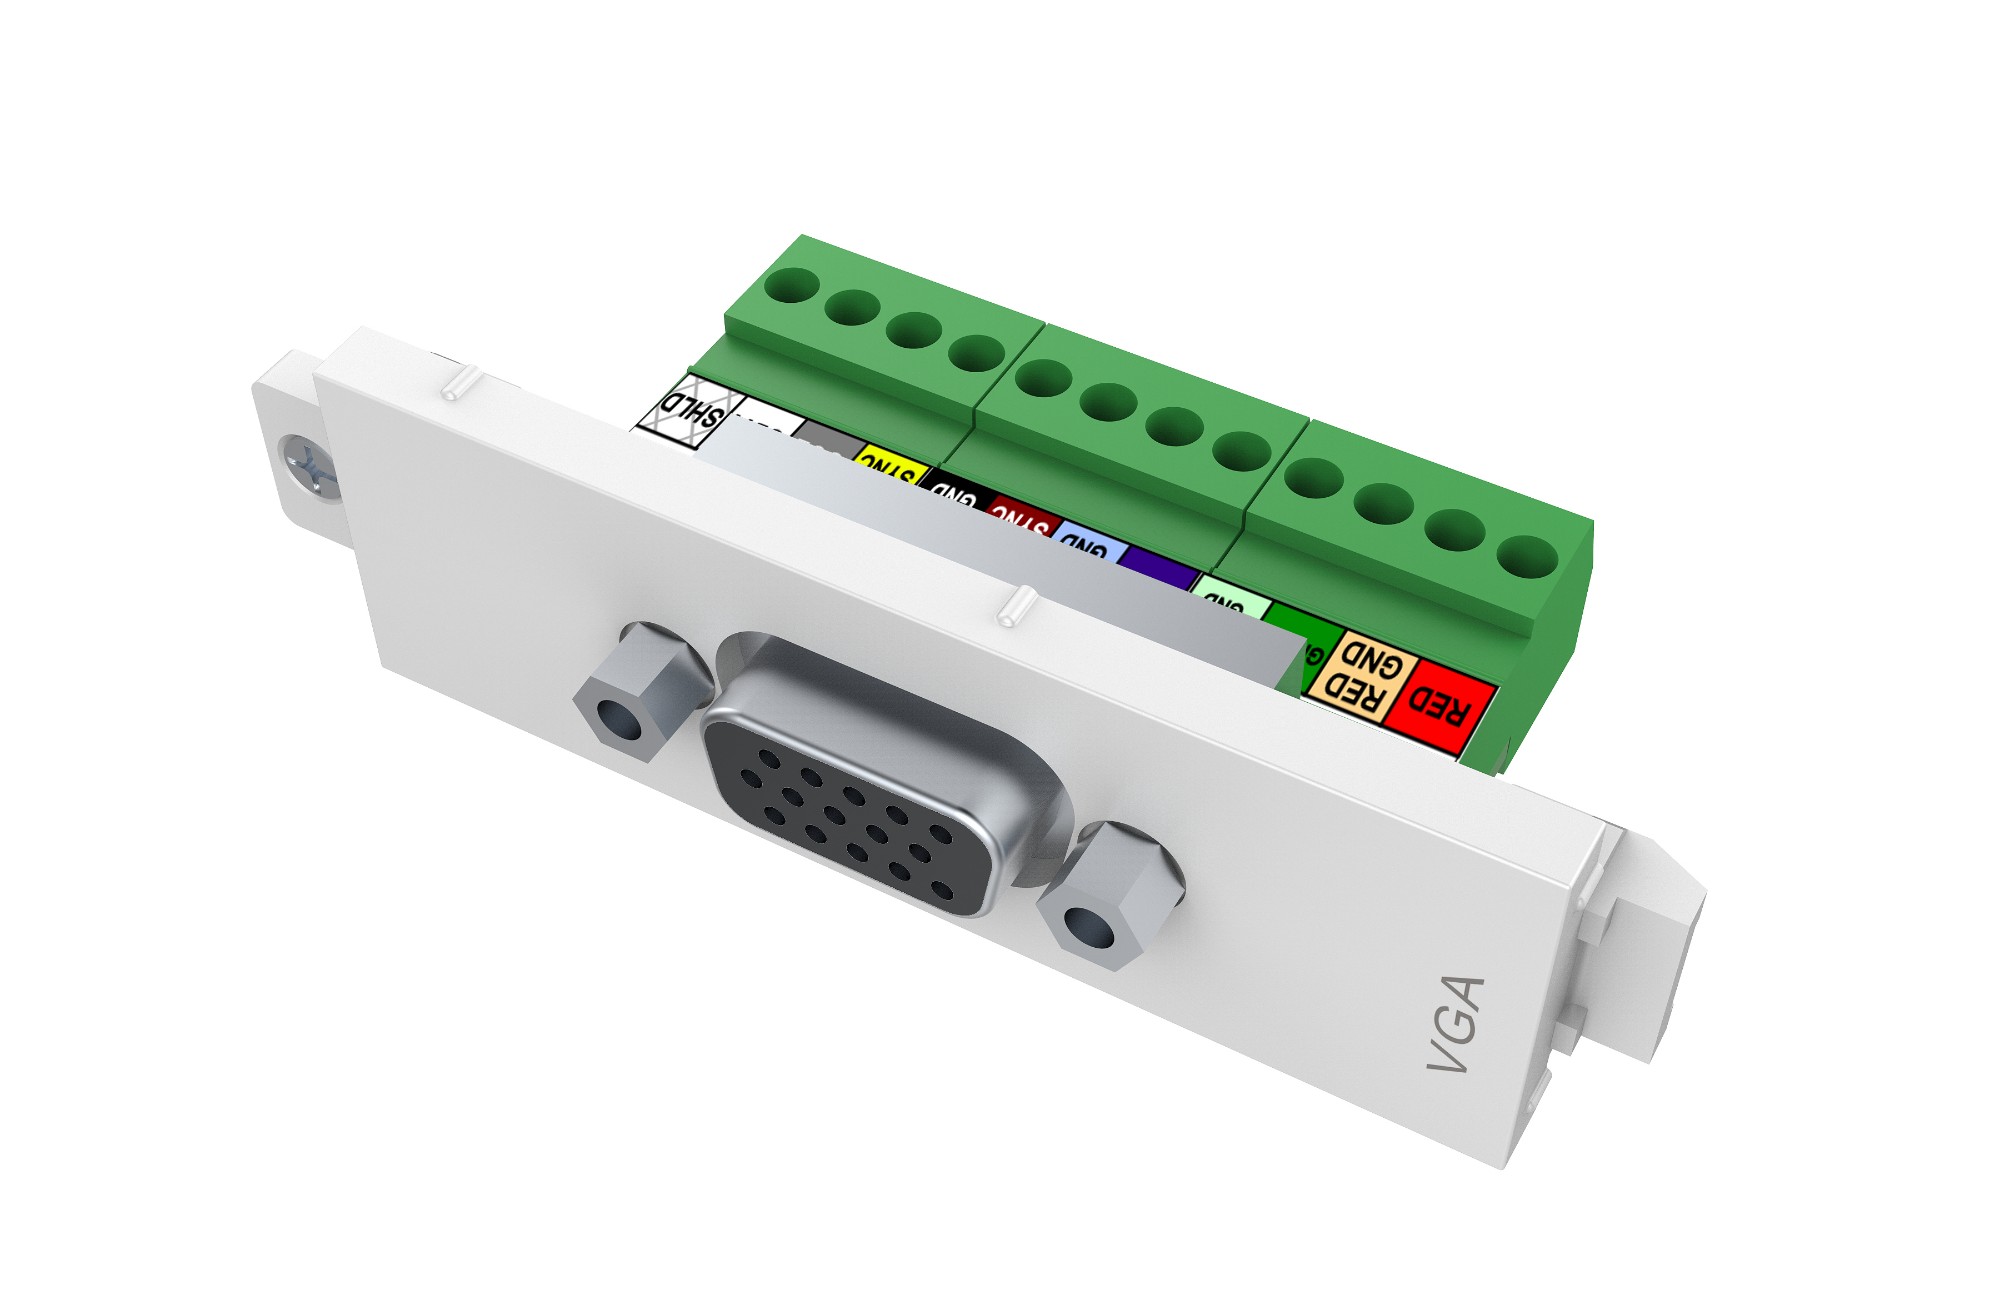 TC3 VGAF VISION Techconnect Modular AV Faceplate - LIFETIME WARRANTY - female VGA only module - female 15-pin VGA socket - bare-wire phoenix connectors on rear - suits pre-terminated Vision cables TC2 3MVGA, TC2 5MVGA, TC2 10MVGA, TC2 15MVGA, TC2 20MVGA - plastic - white